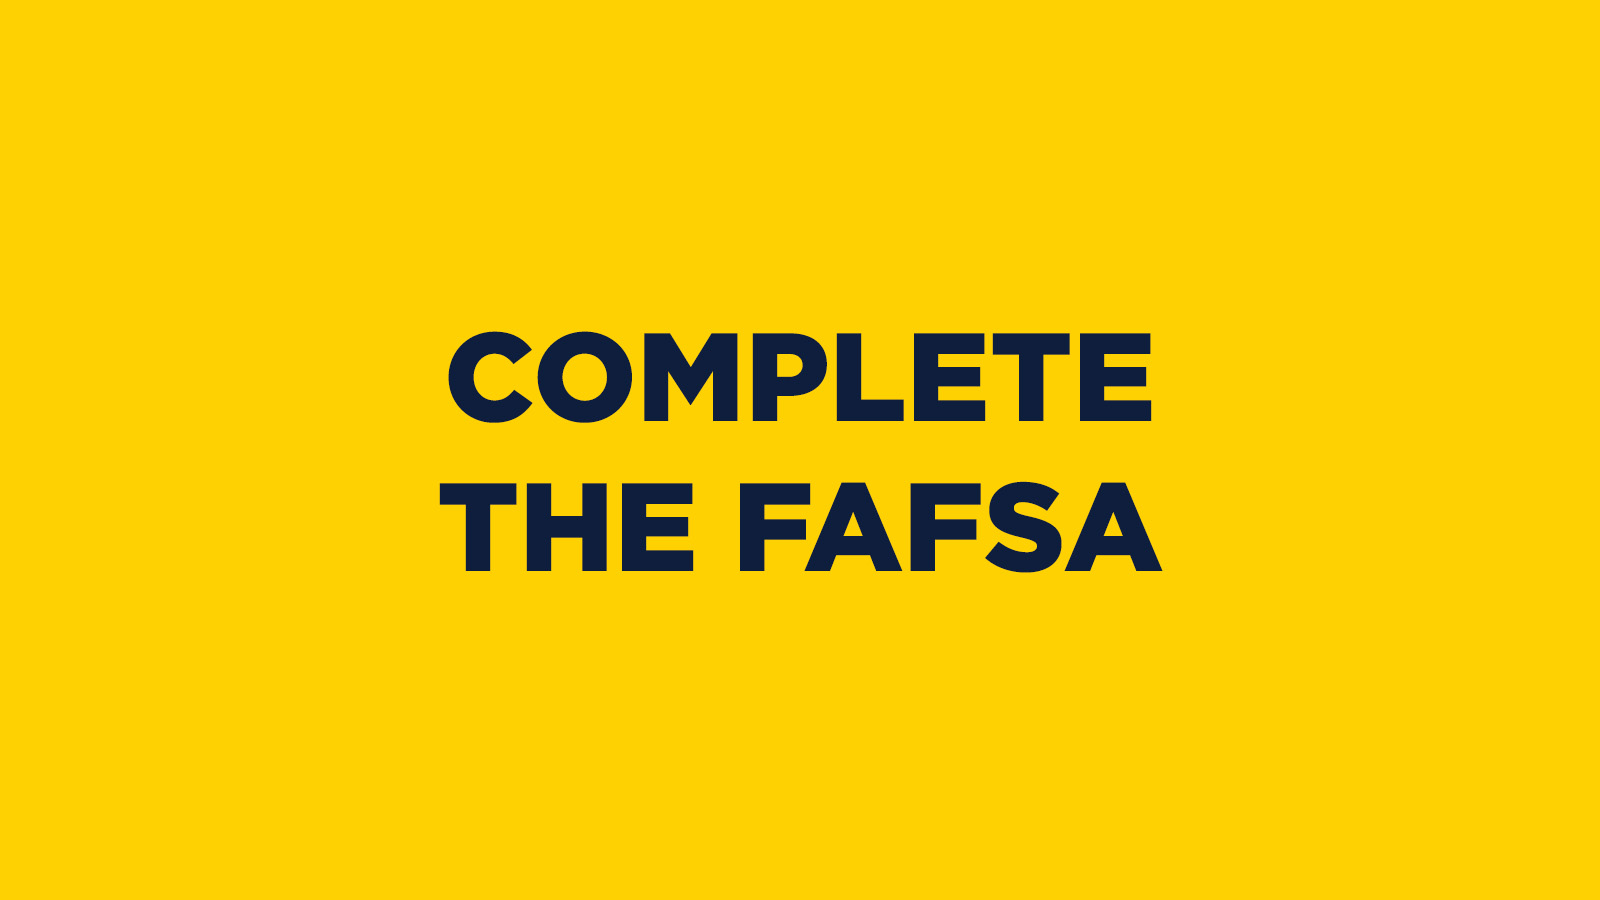 COMPLETE THE FAFSA